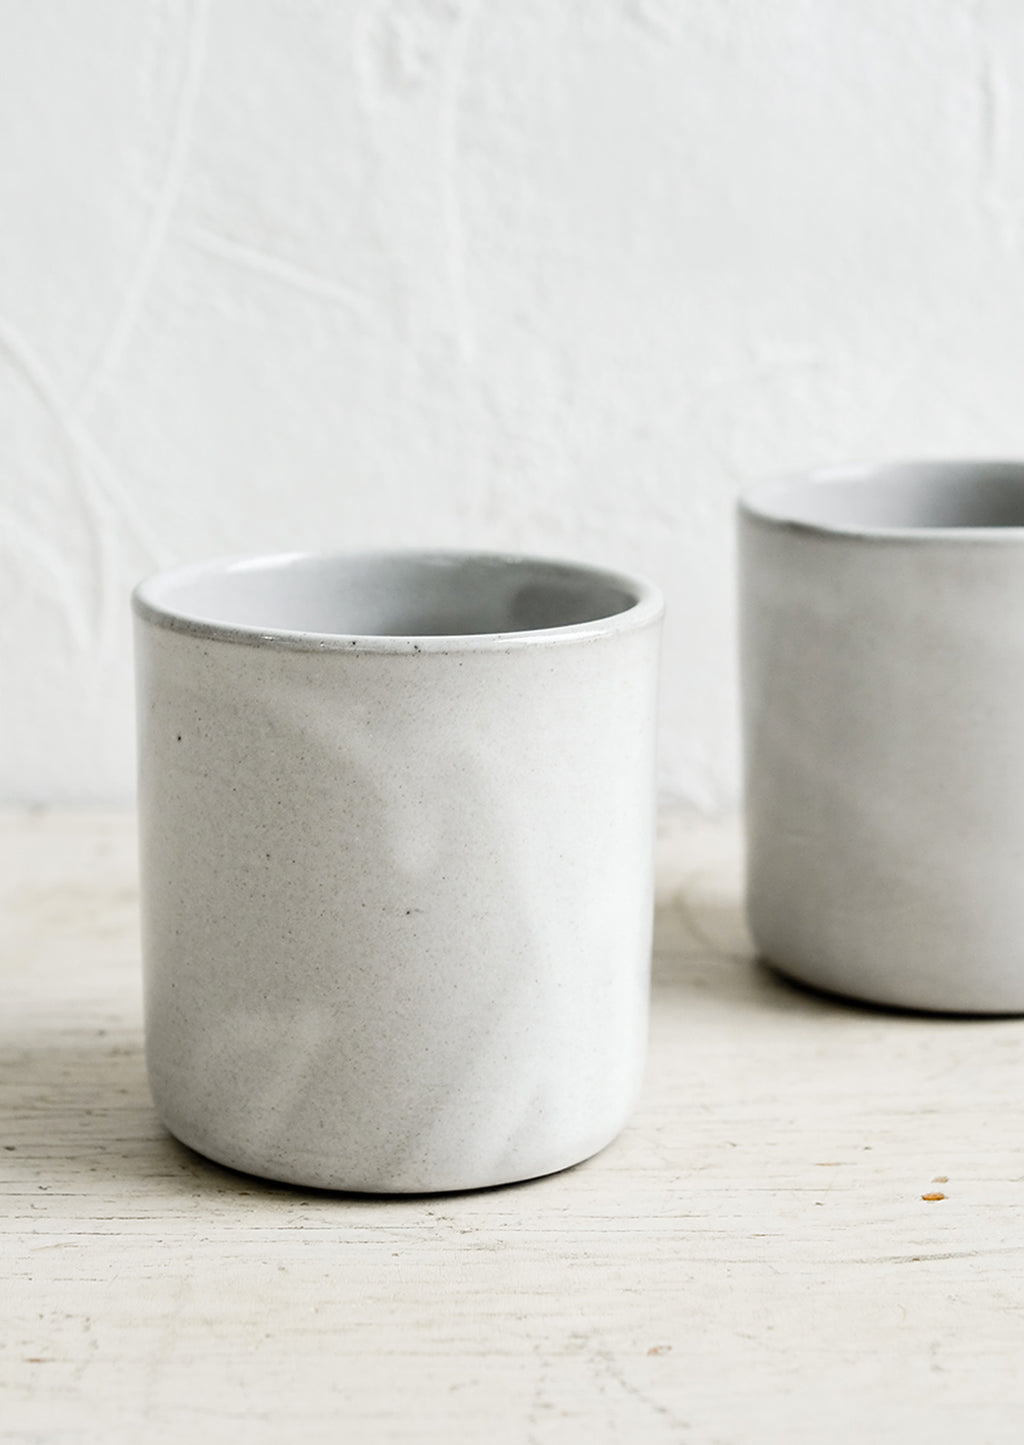 1: Two short ceramic cups in a grey glaze.